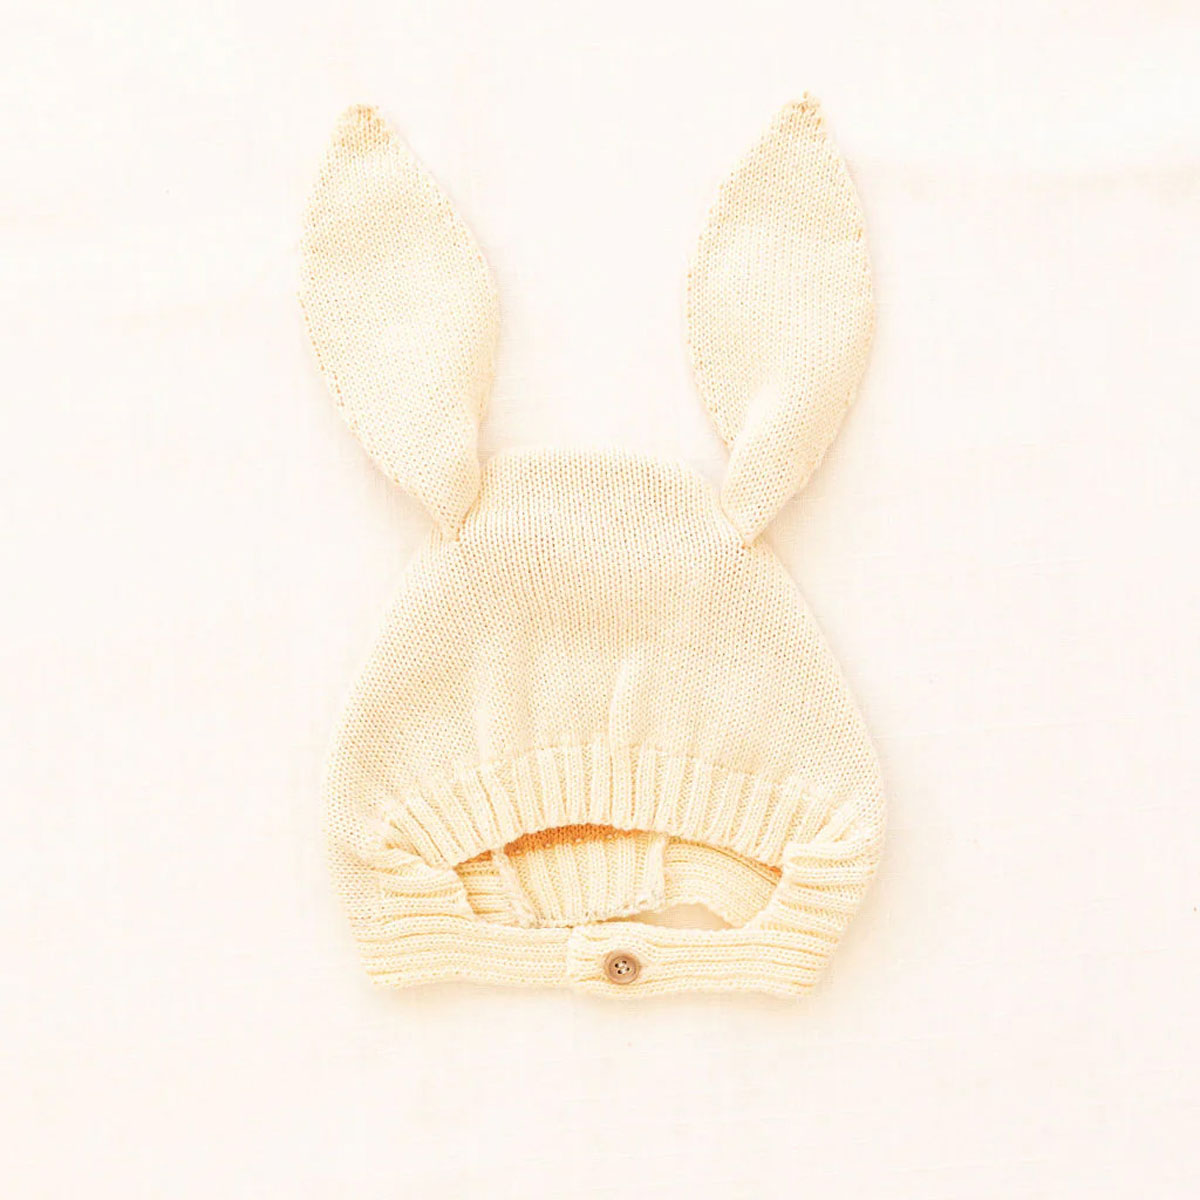 Fin and Vince Bunny Hat - Buttercream with Golden Earth